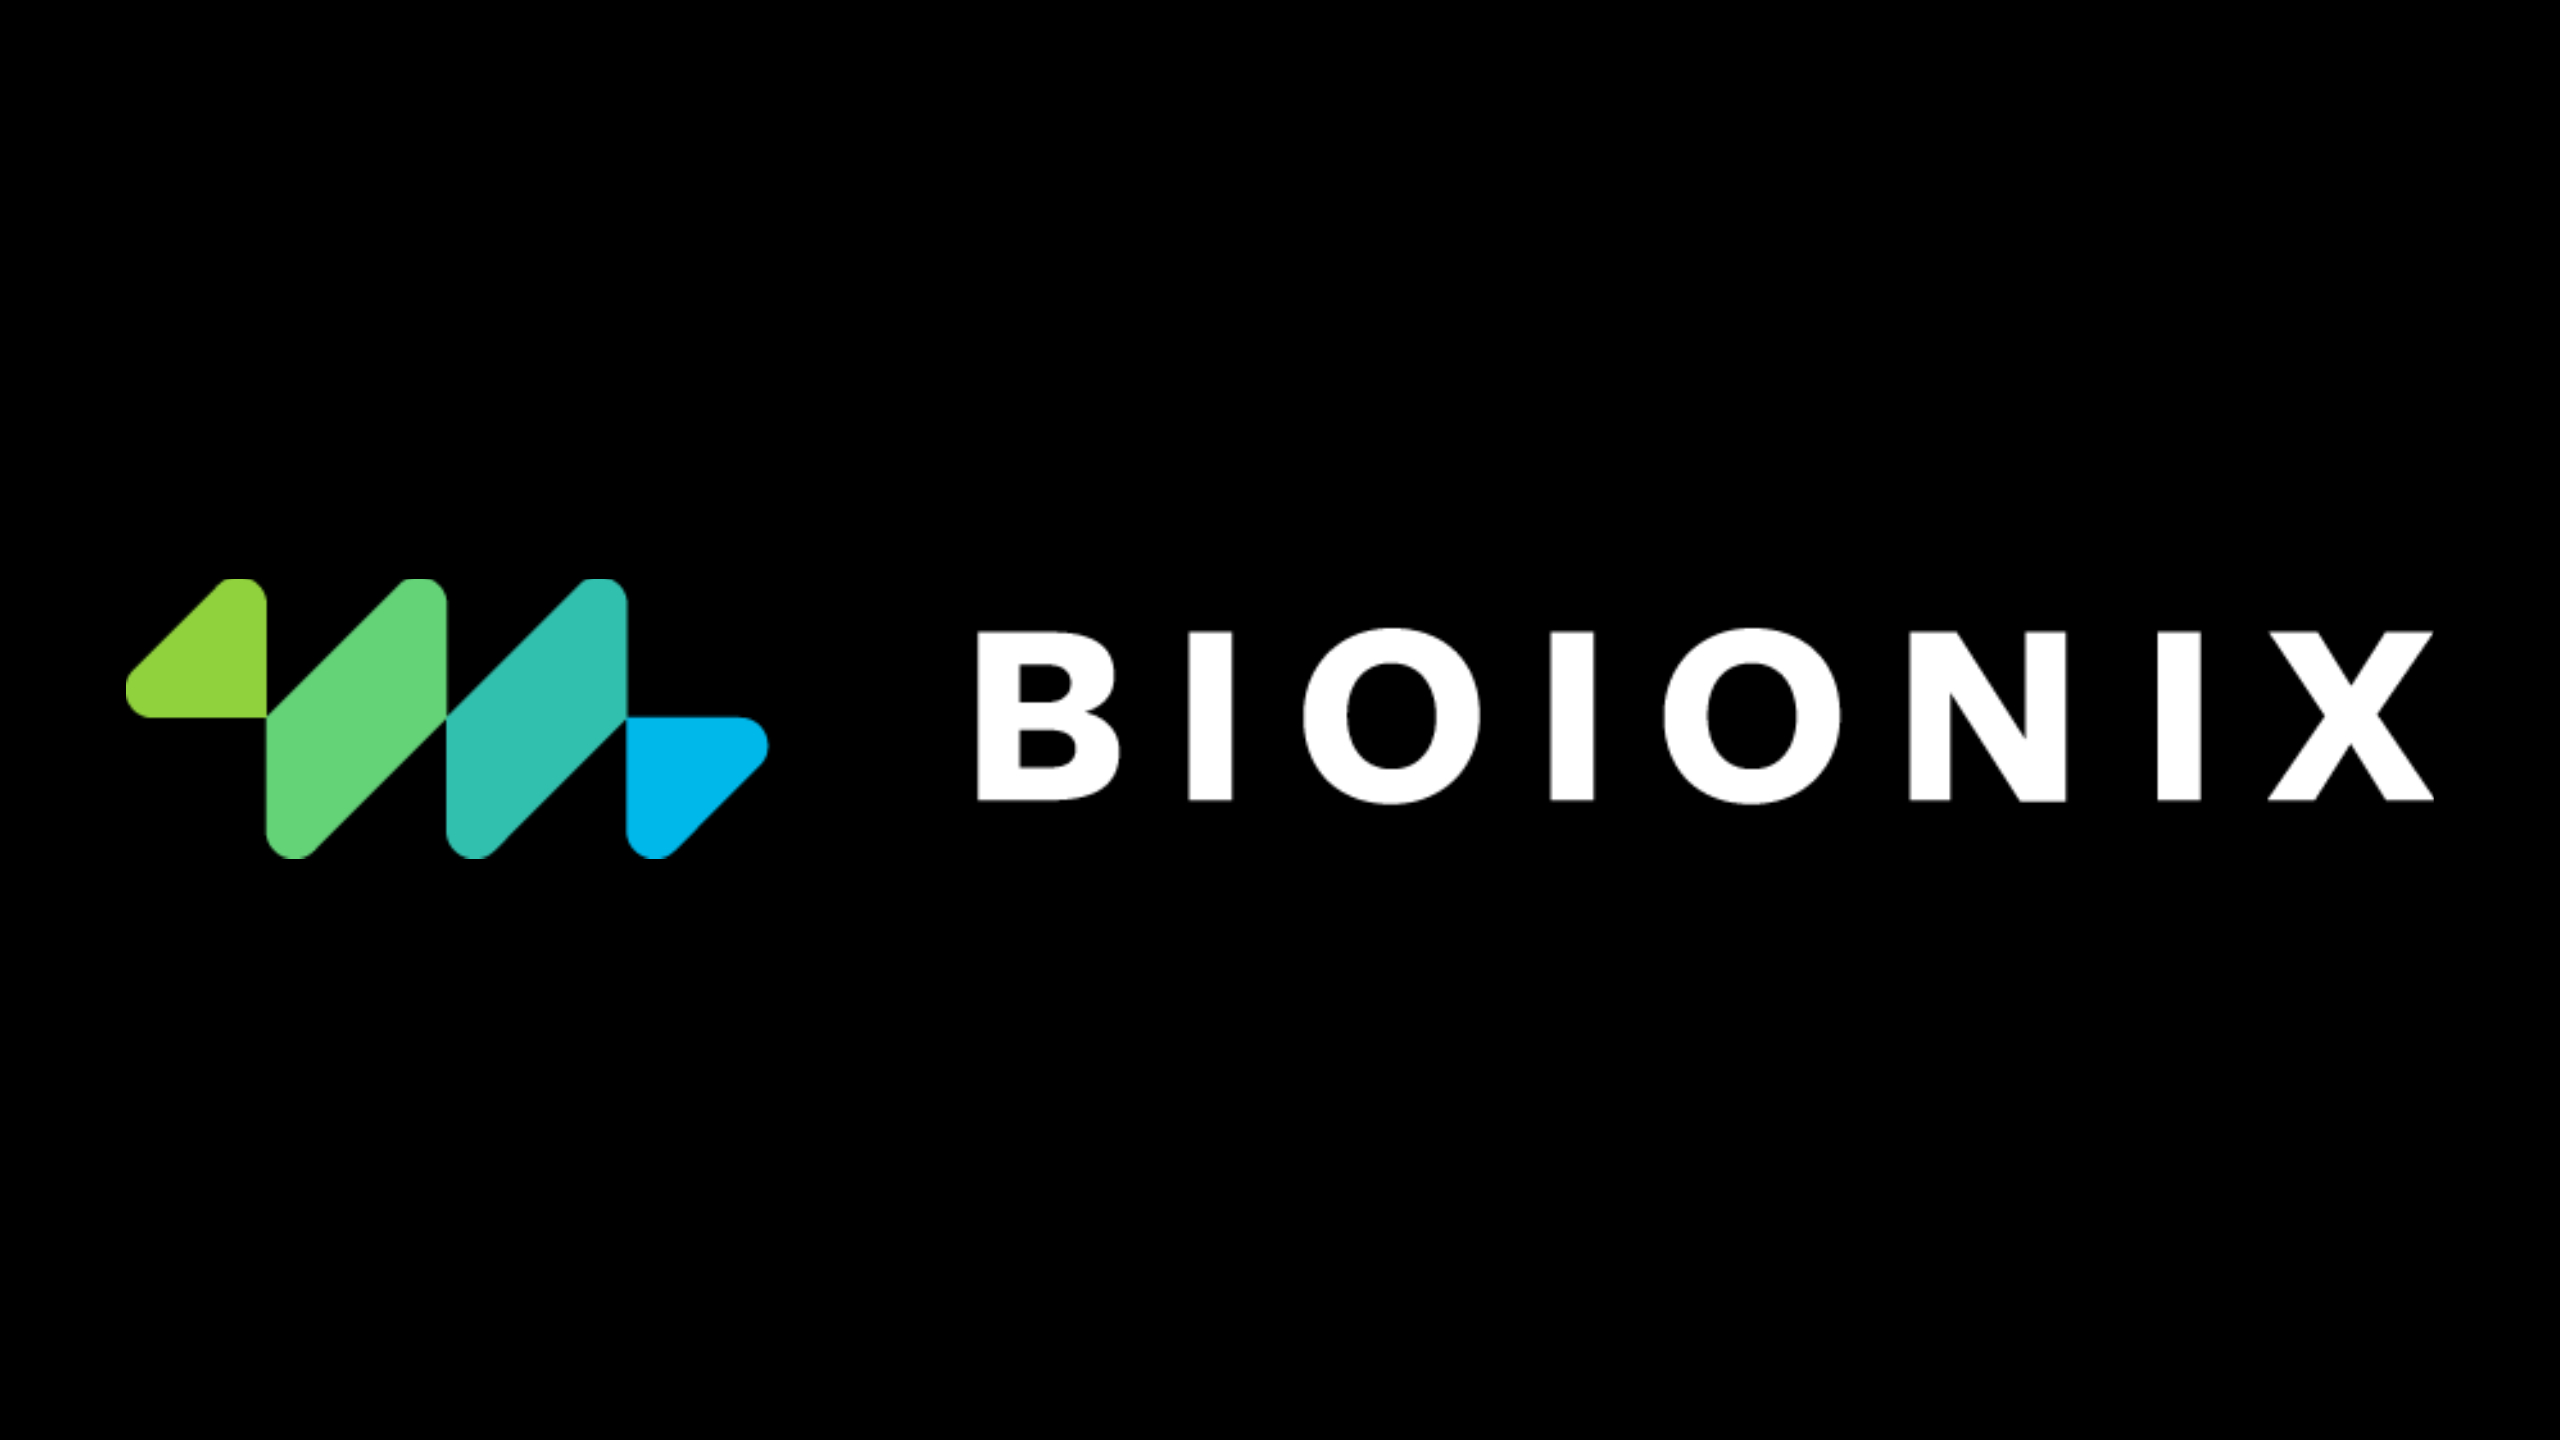 This is a photo of the Bioionix logo.